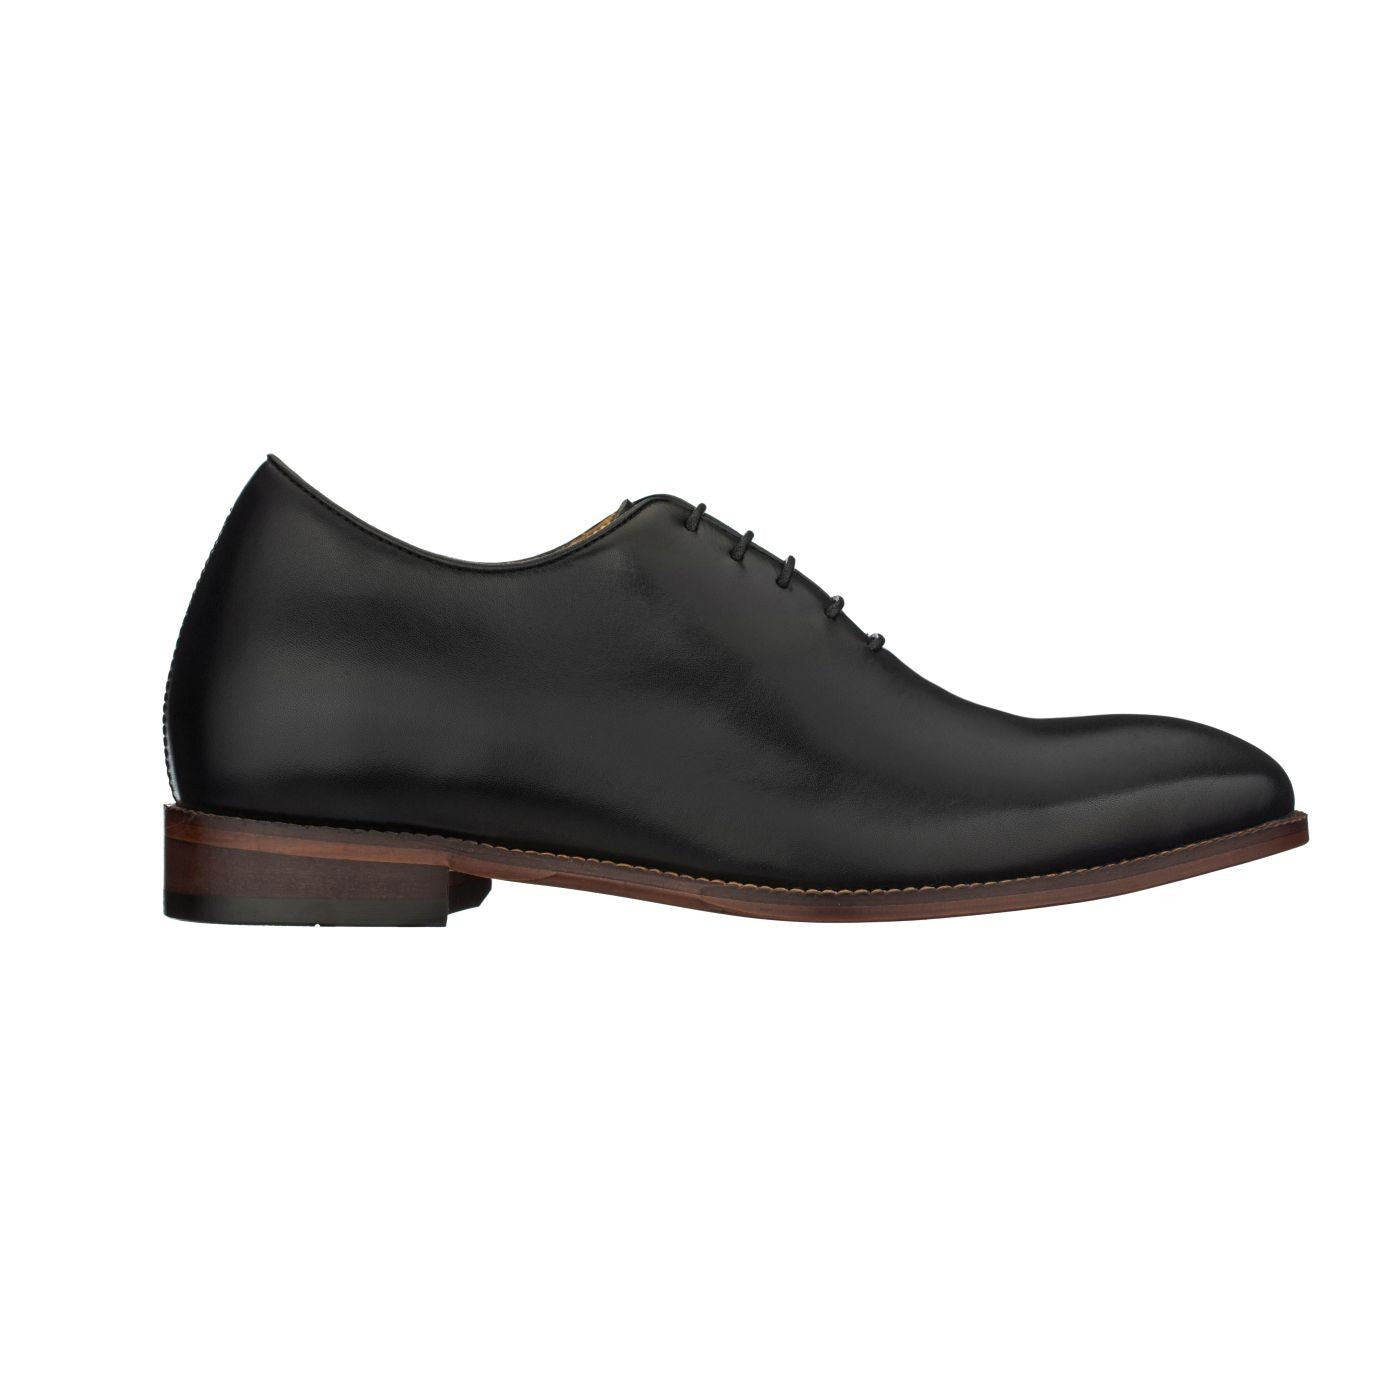 Elevator shoes height increase TOTO - S3001 - 2.6 Inches Taller (Black) Wholecut w/ Leather Sole